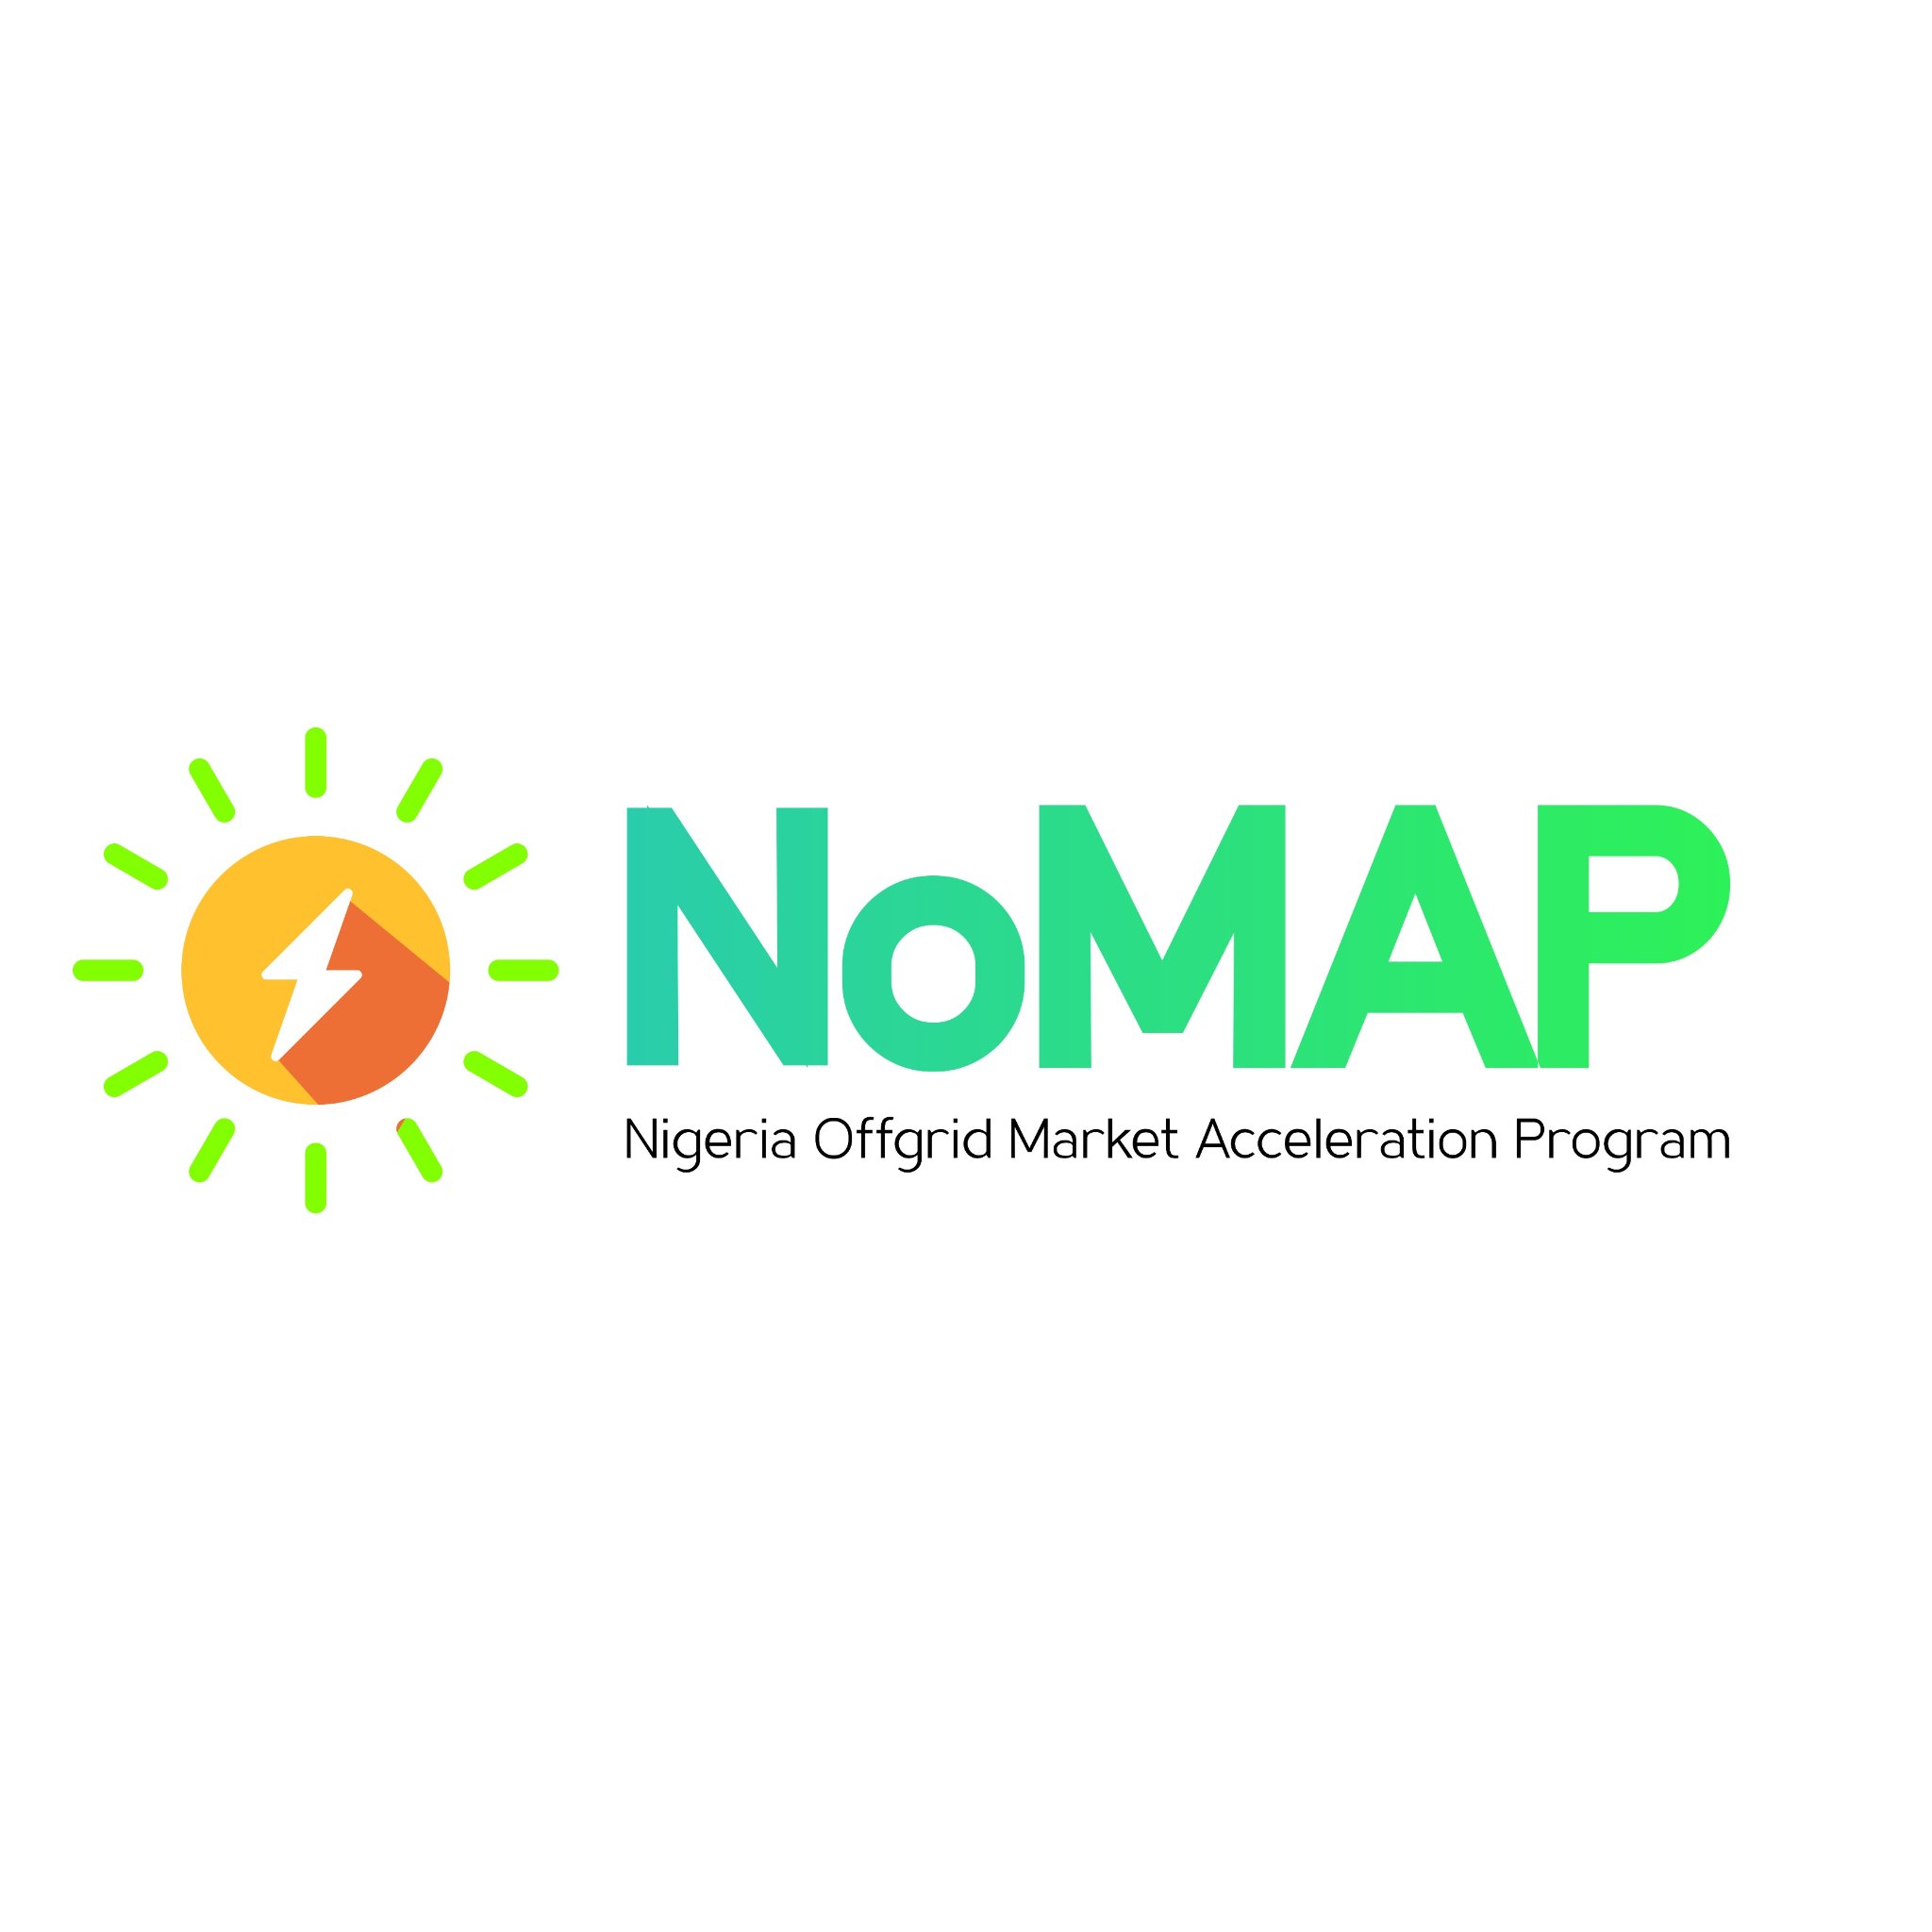 The Nigeria Off-grid Market Acceleration Program (NOMAP) is an independent market accelerator tasked with tackling off-grid energy market barriers in Nigeria